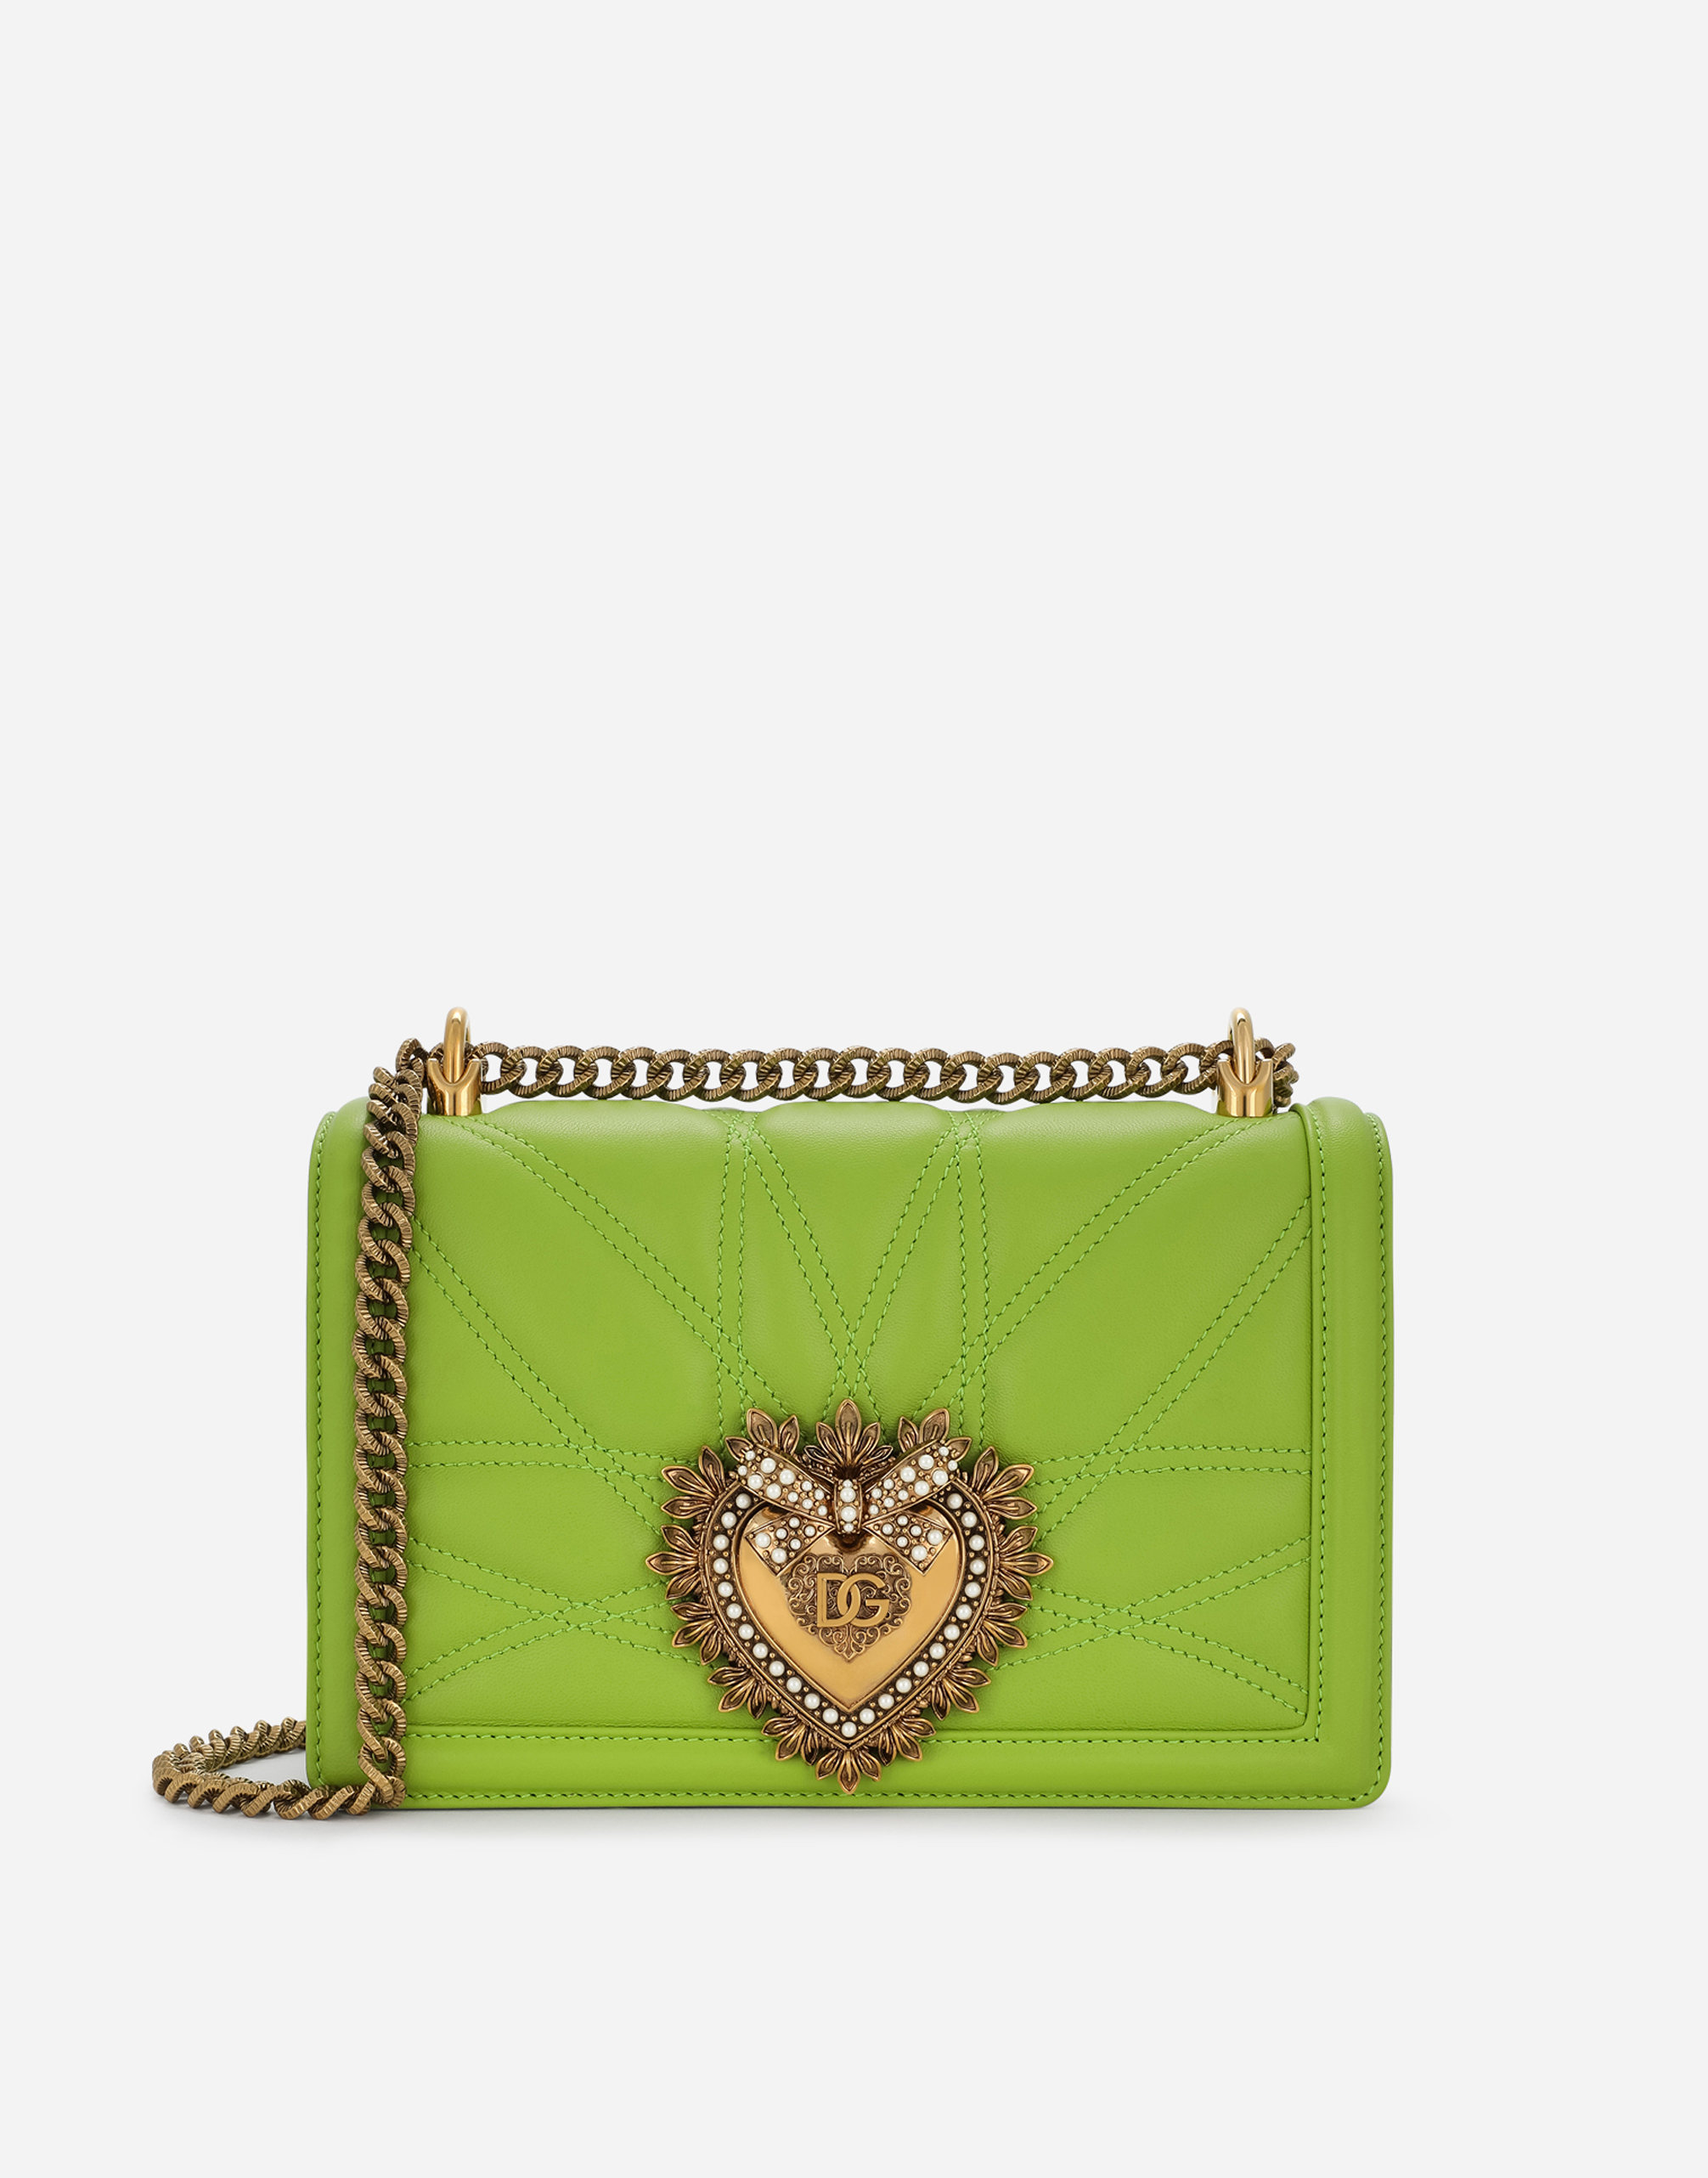 Medium Devotion bag in quilted nappa leather in Green